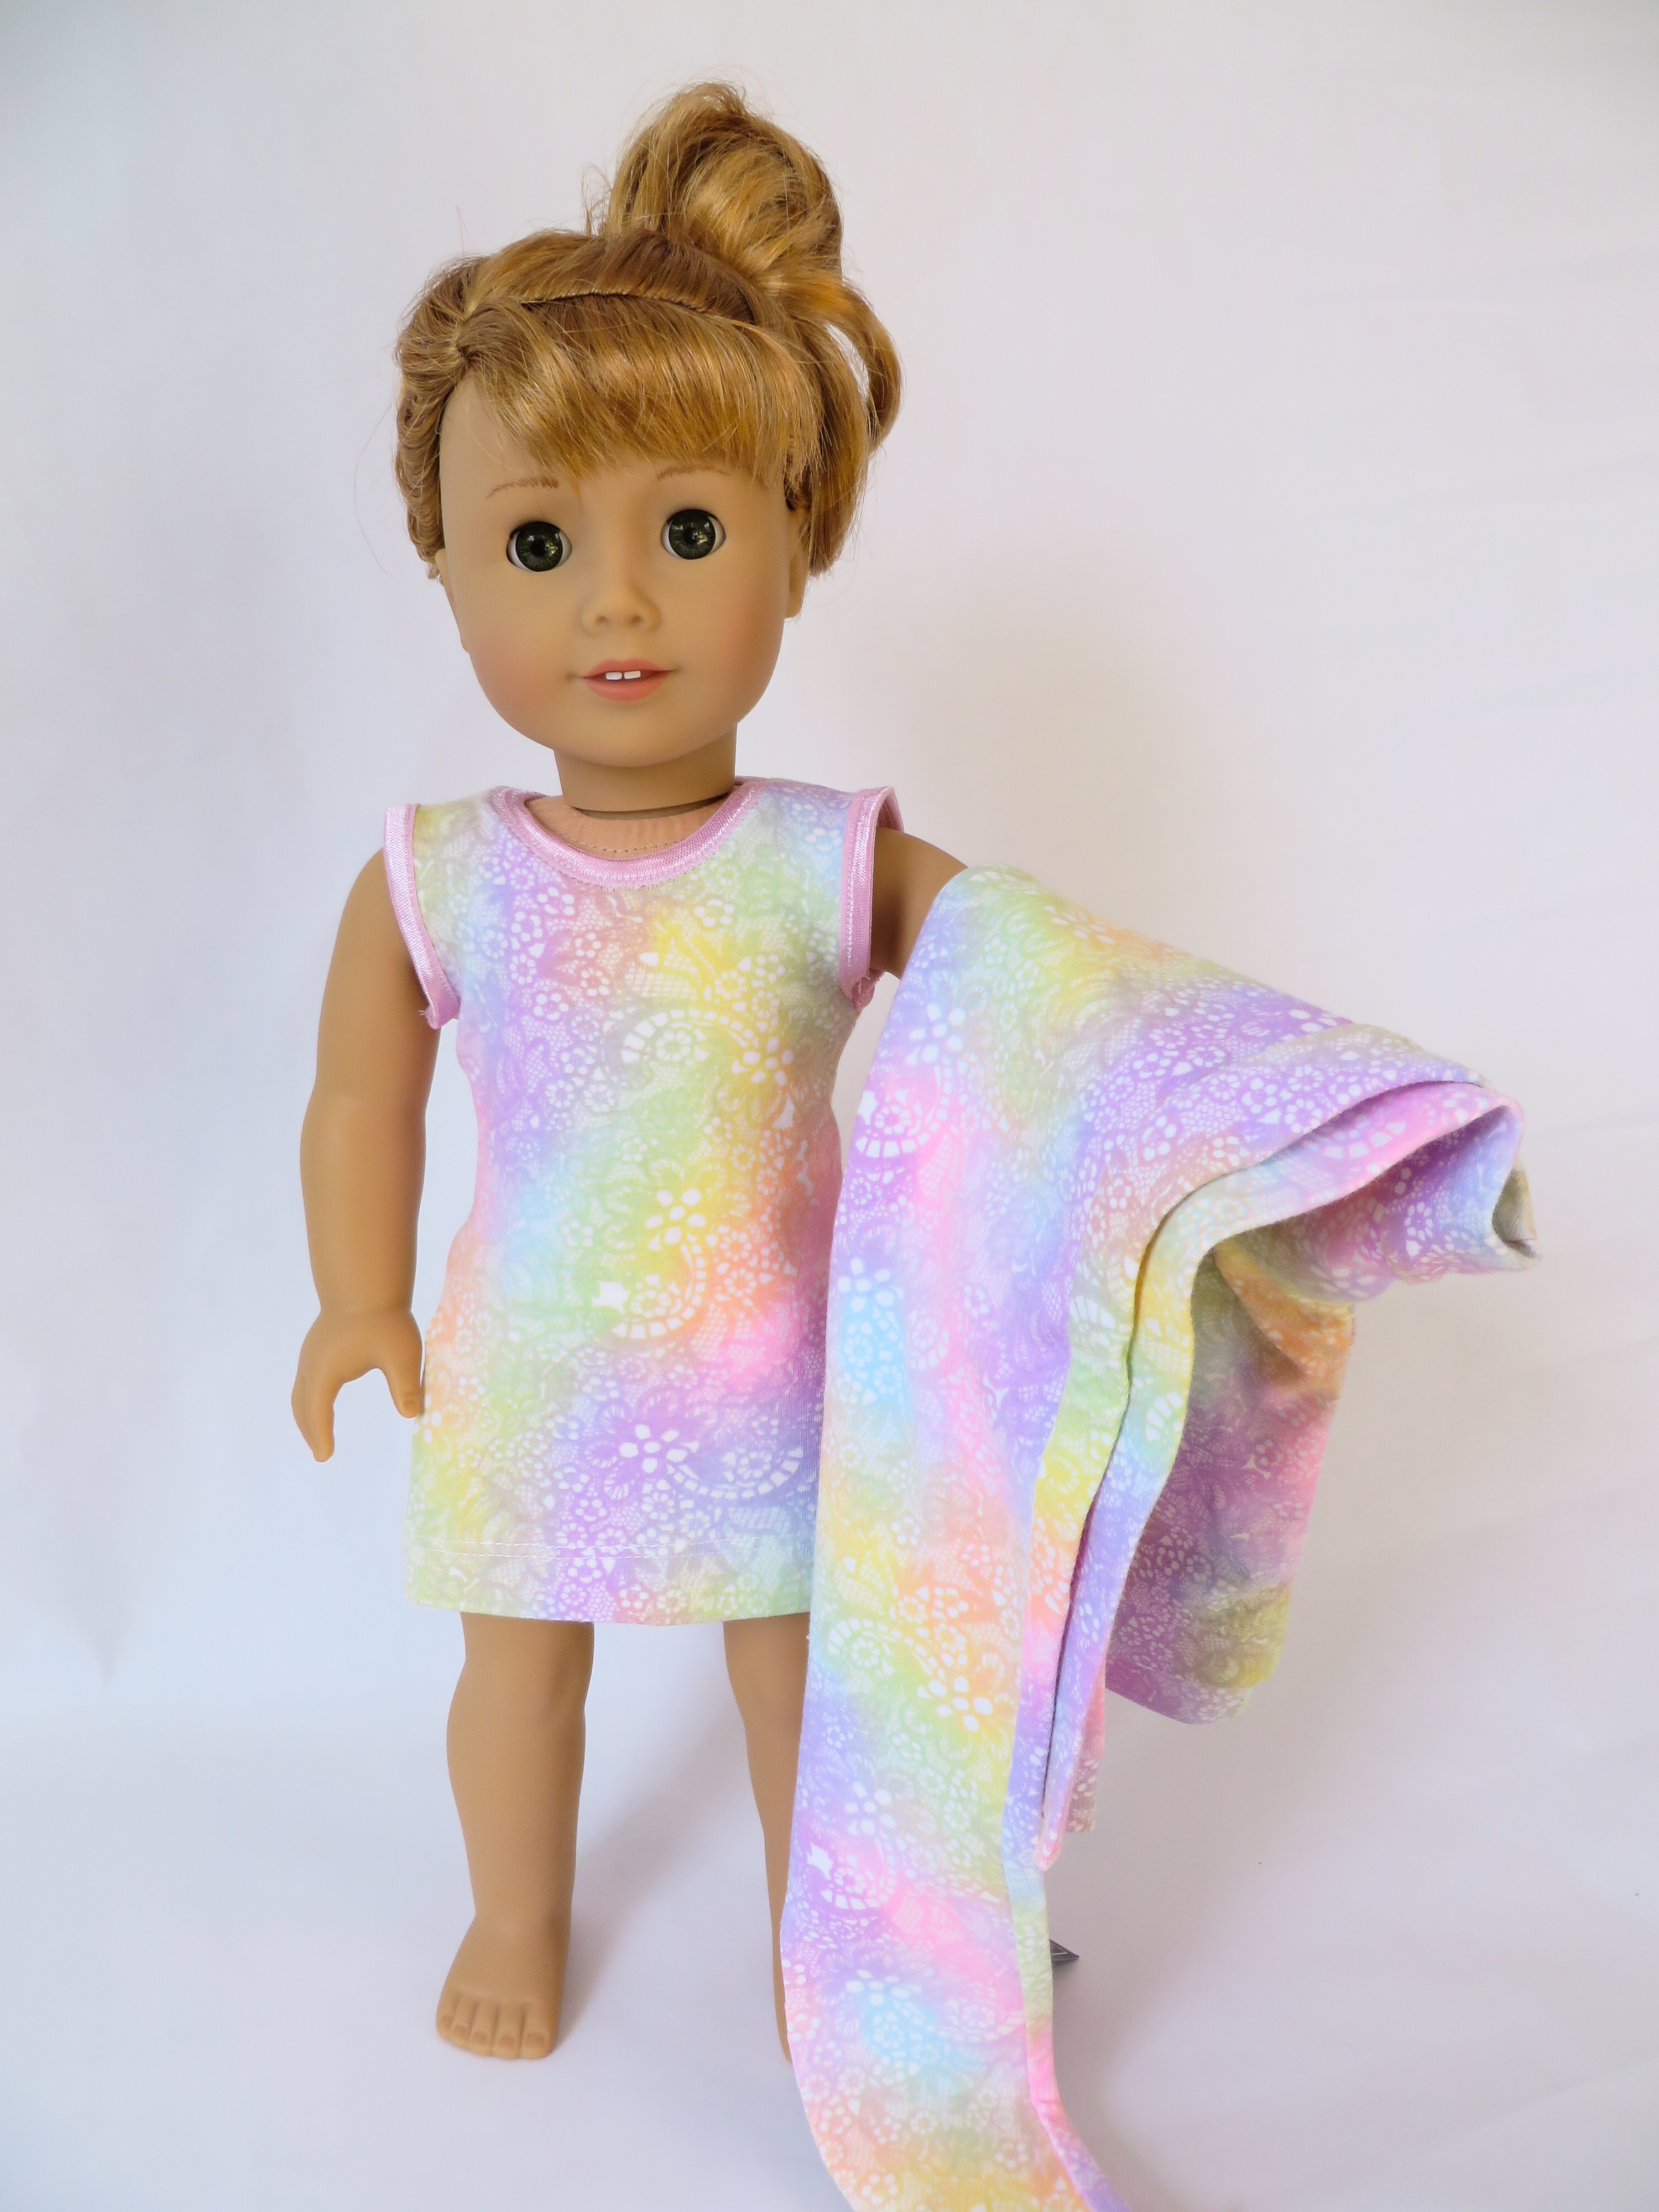 Make a tee shirt dress from a tee shirt pattern hack by Oh Sew Kat! Make American Girl Doll Clothes with easy sewing PDF patterns from Oh Sew Kat! Blog with craft tutorials and free skirt pattern. #ohsewkat #dollclothes #dress #18inchdolls #sewing